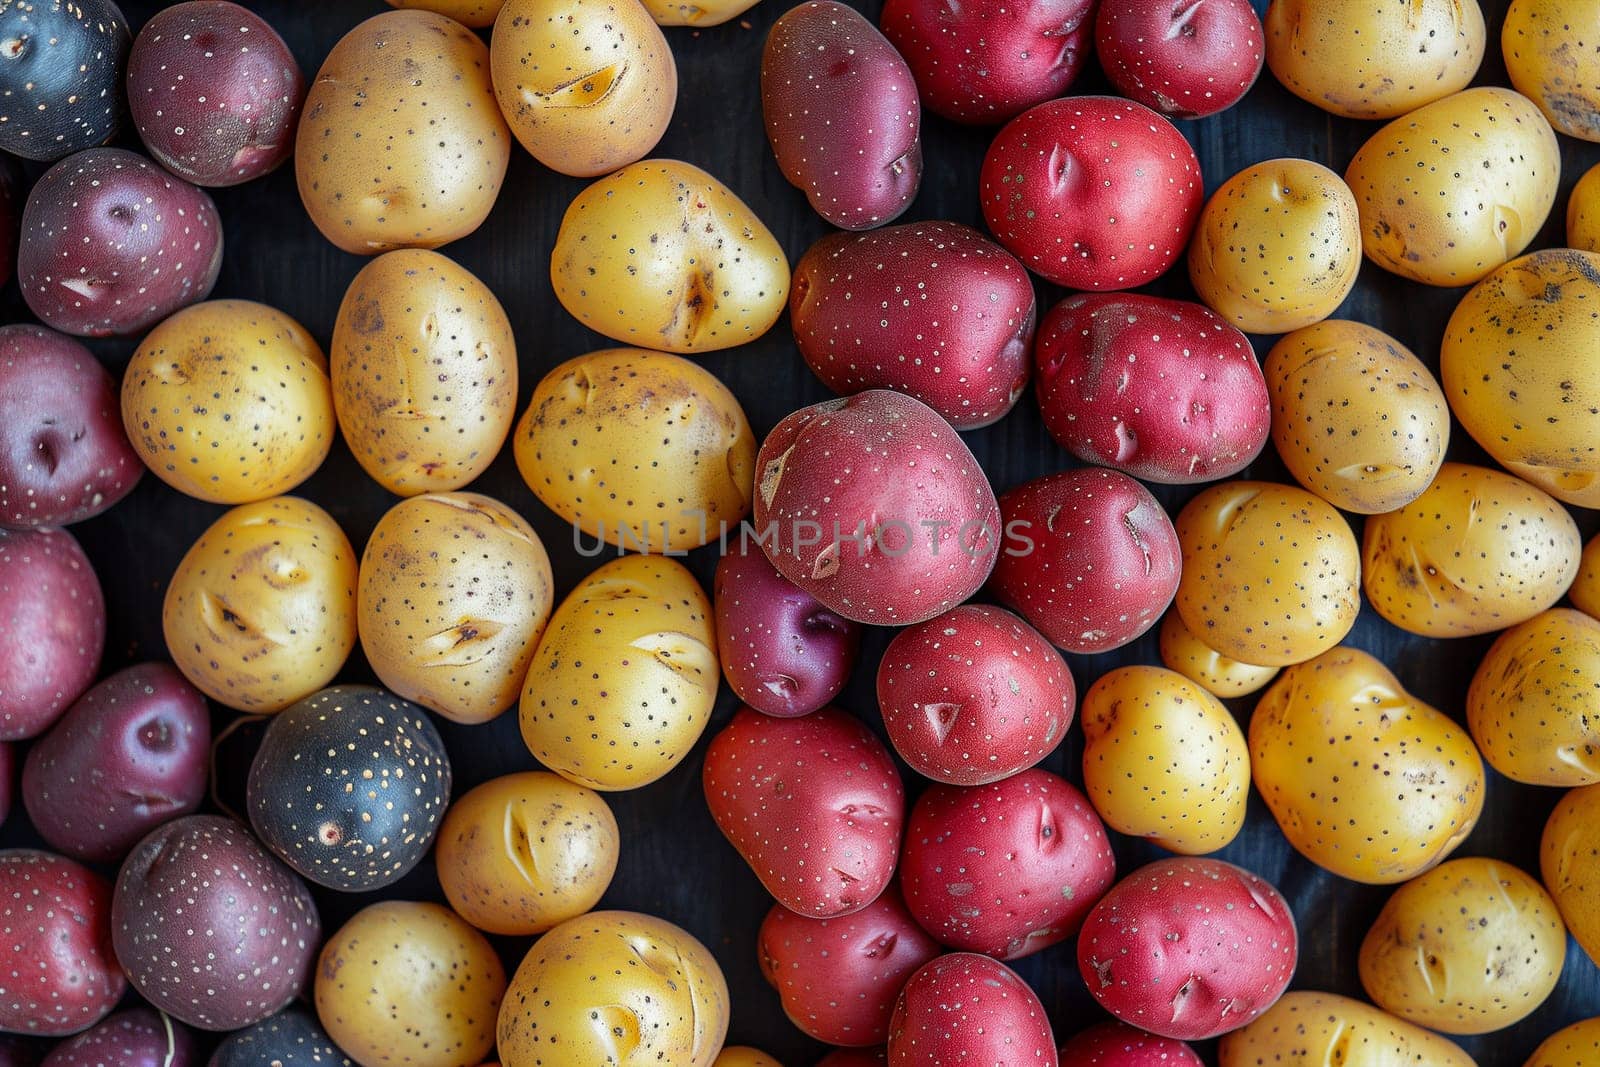 A variety of colorful potatoes, including purple, red, and yellow varieties, neatly arranged showcasing their diversity.